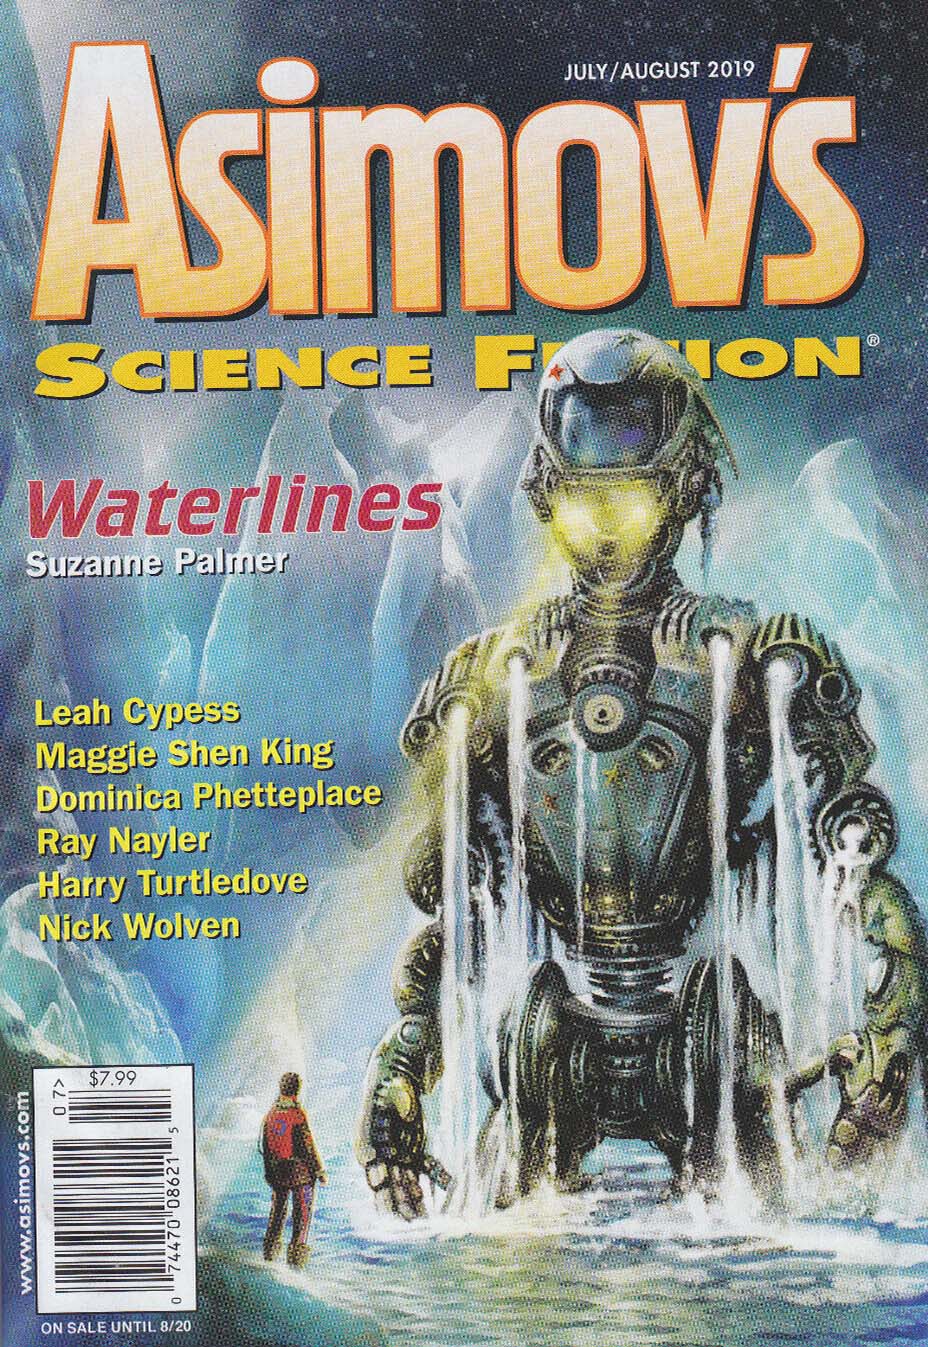 Asimov's Science Fiction July/August 2019, , July / August 2019 S